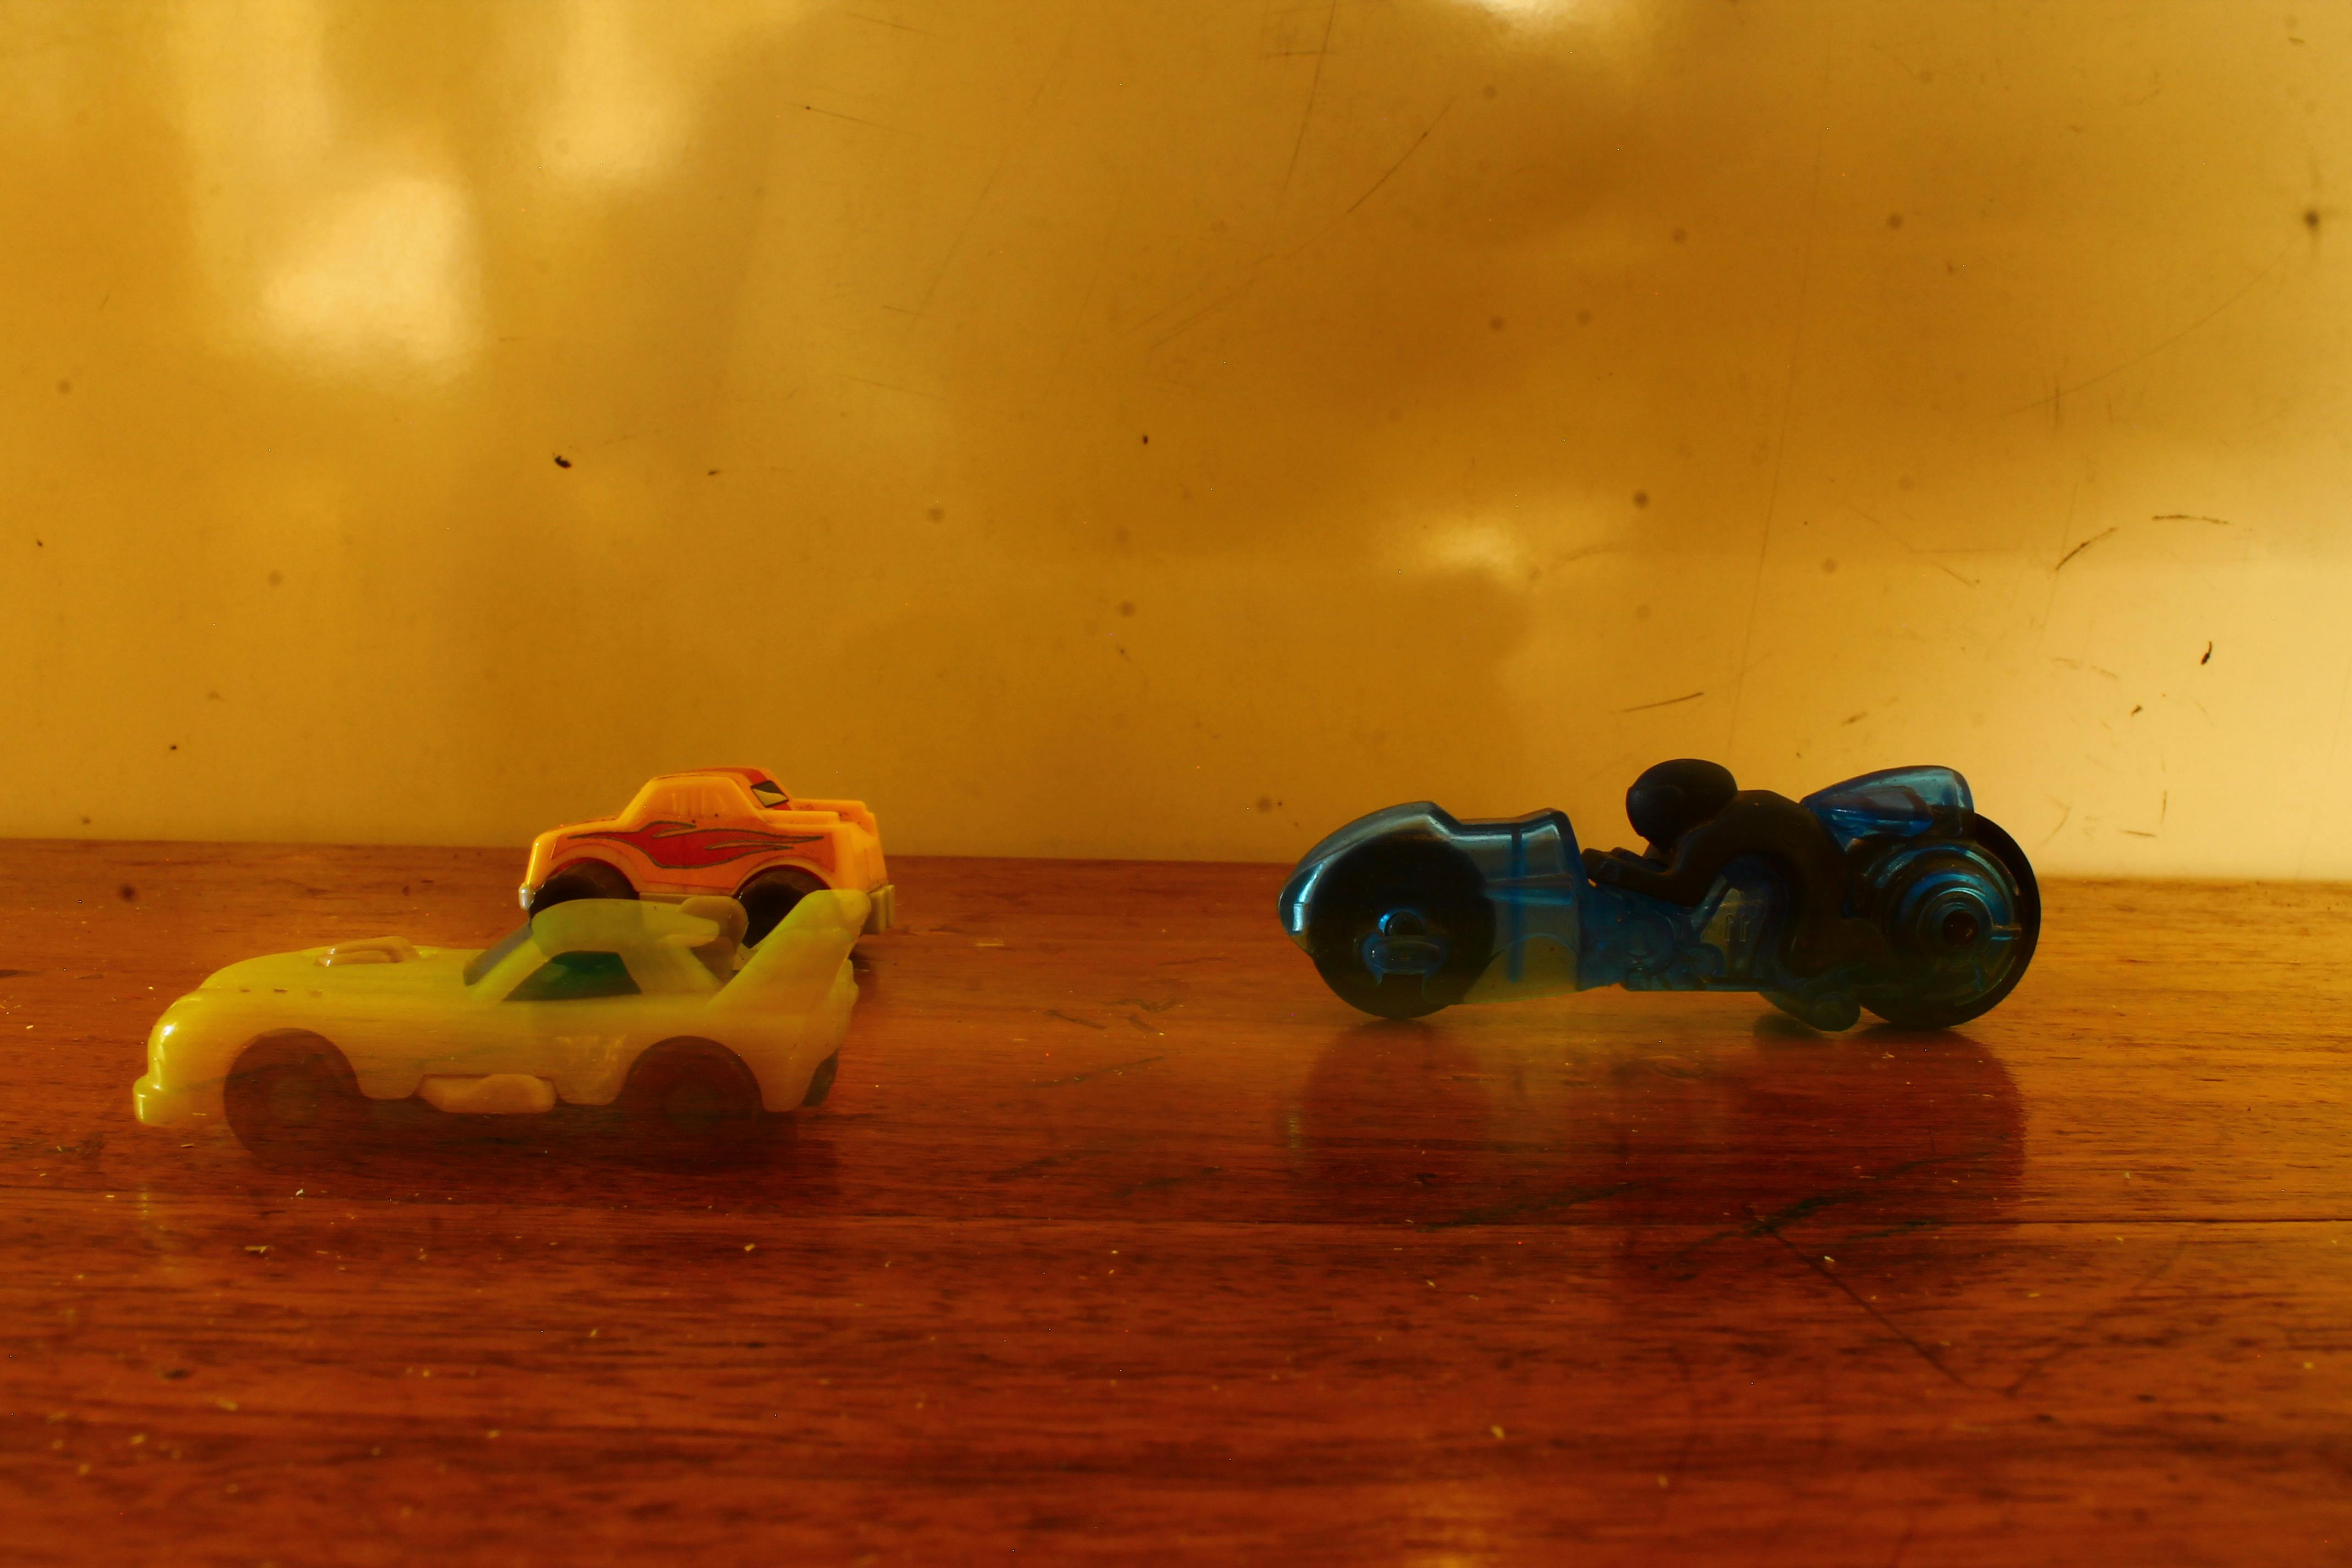 Free stock photo of Race Story Of Toys